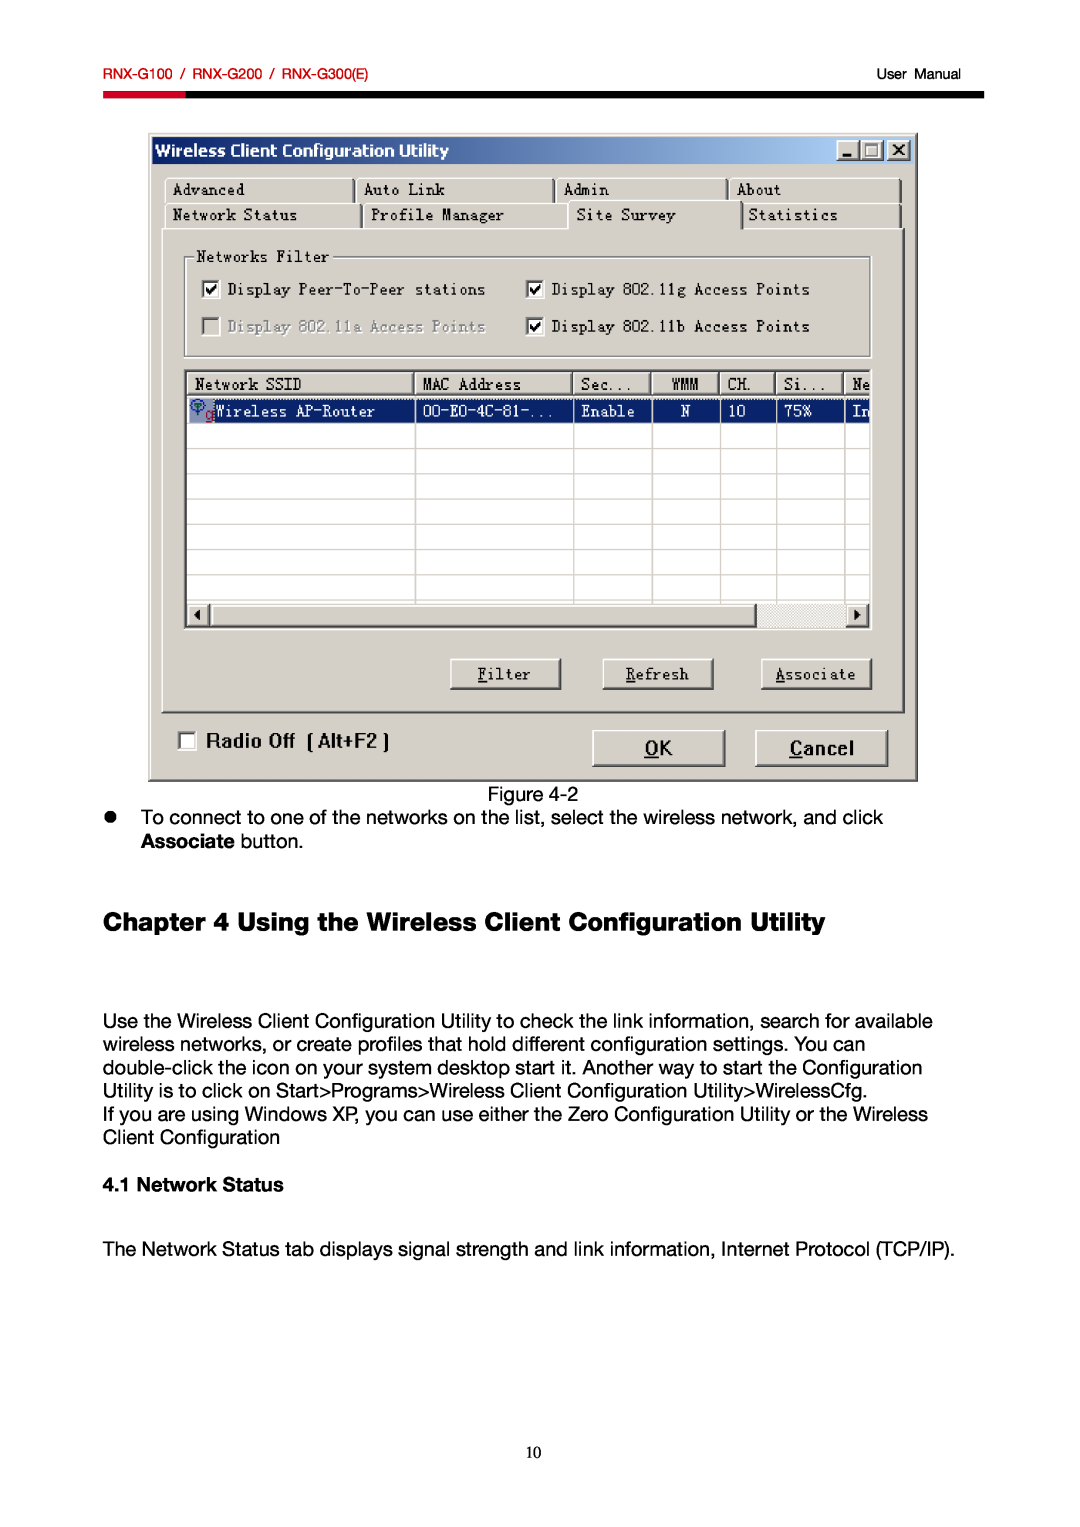 Rosewill RNX-G100, RNX-G200, RNX-G300 user manual Using the Wireless Client Configuration Utility, Network Status 